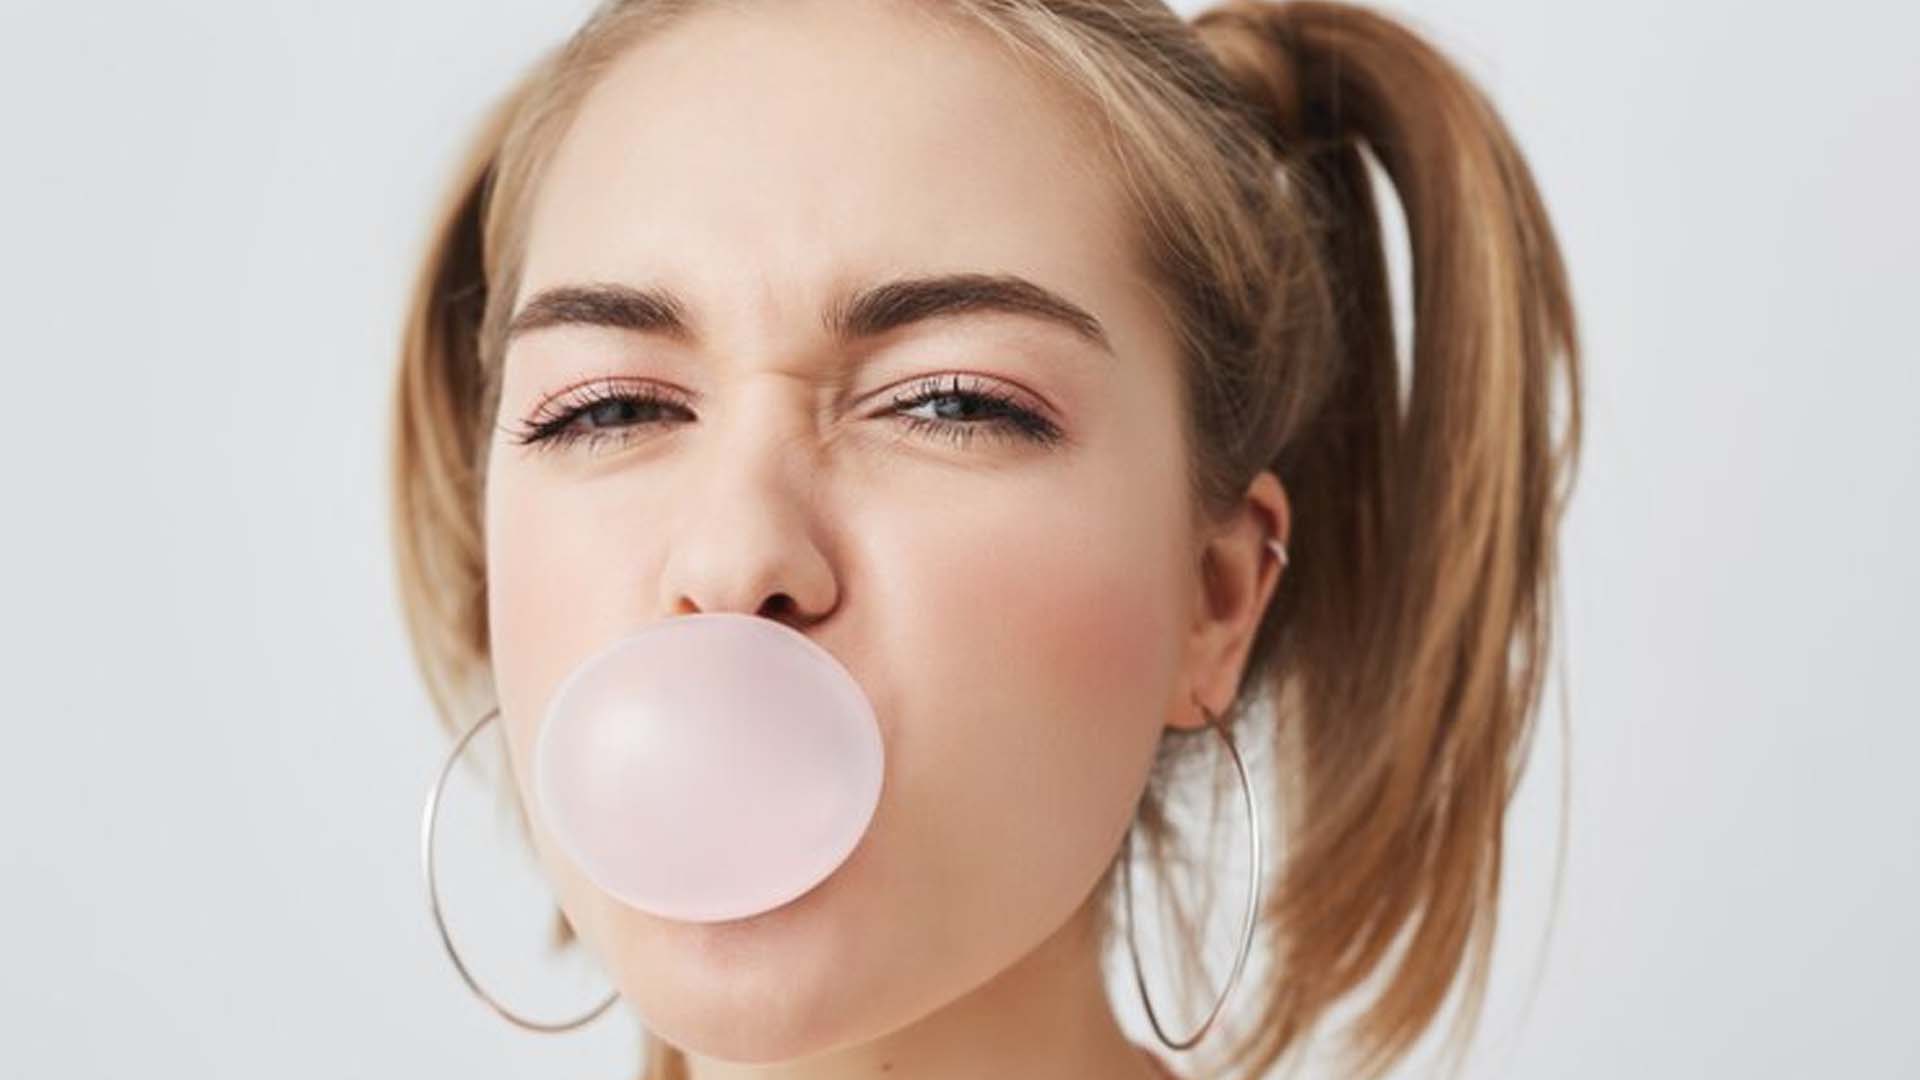 Model posing with Chewing Gum